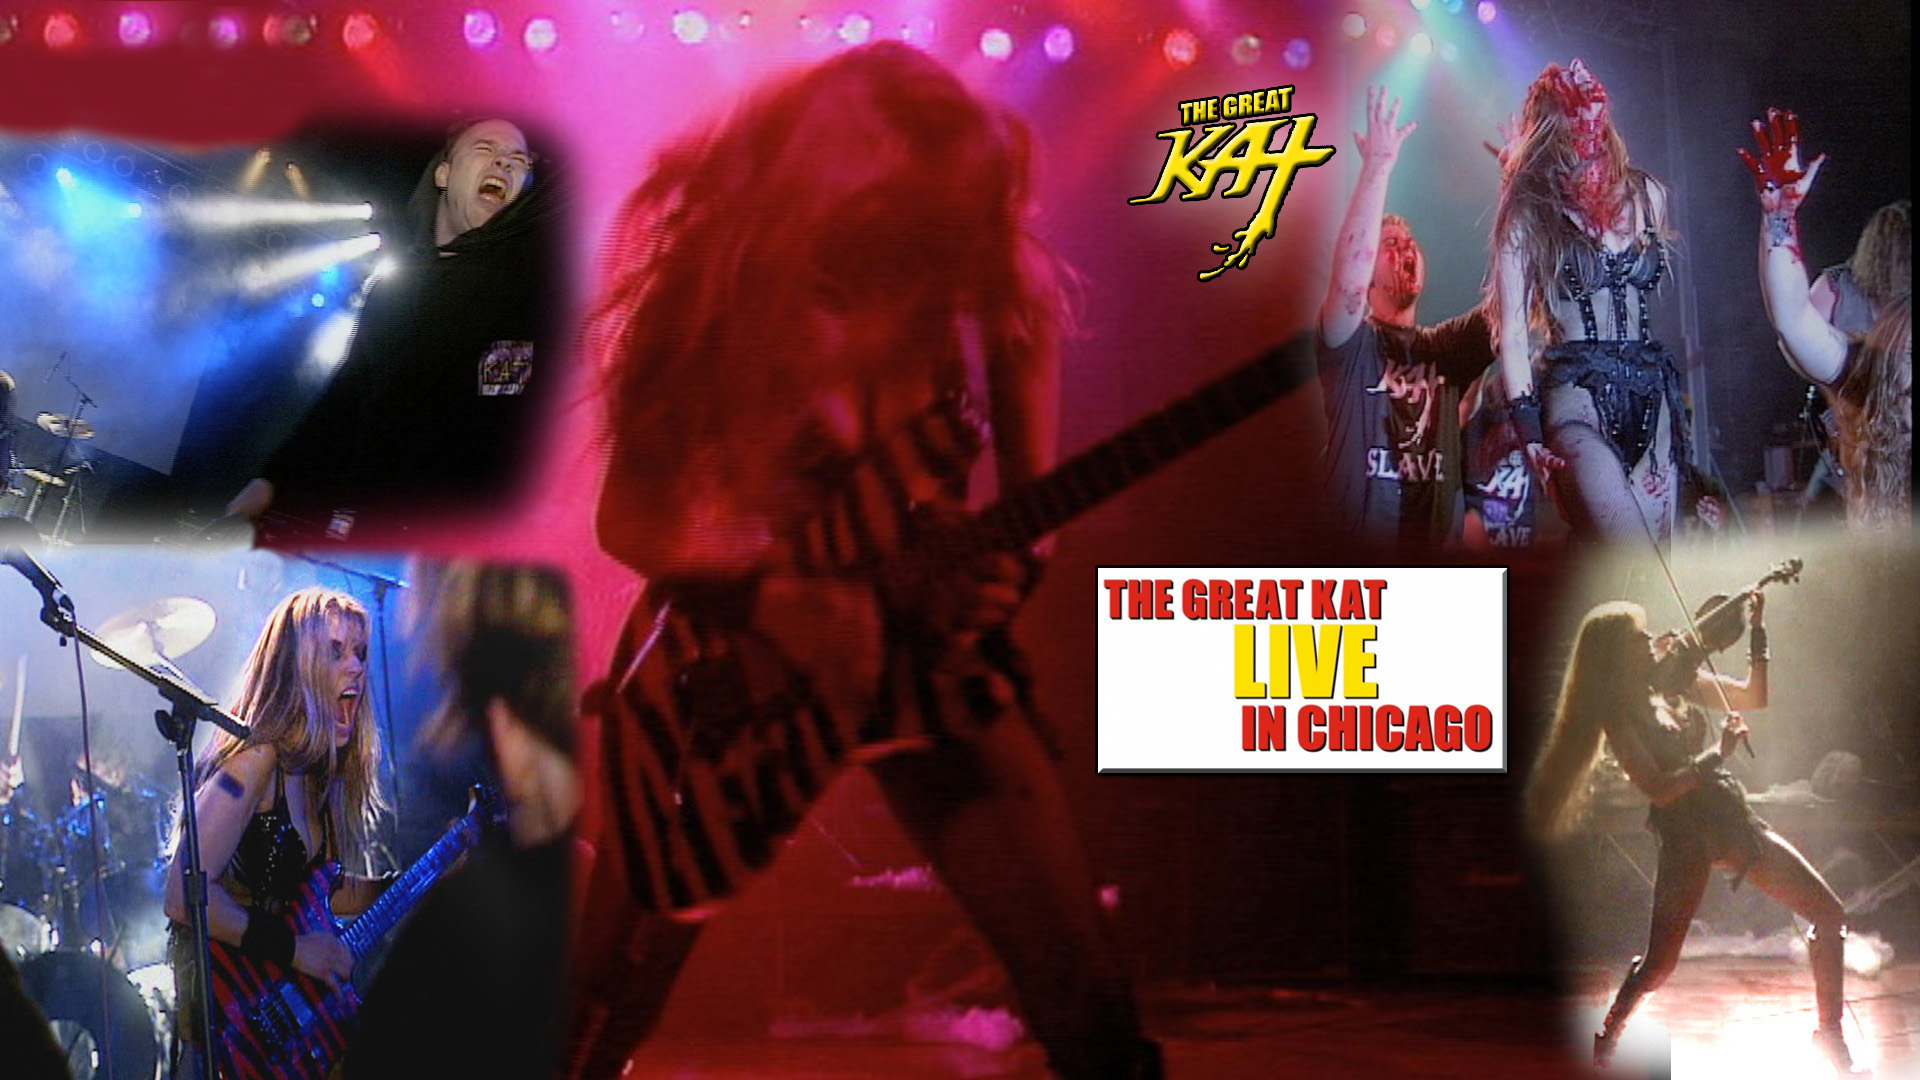 "LIVE IN CHICAGO" - THE GREAT KAT GUITAR/VIOLIN GODDESS SHREDS LIVE in CHICAGO on TOUR! MUSIC VIDEO PREMIERES on AMAZON PRIME!